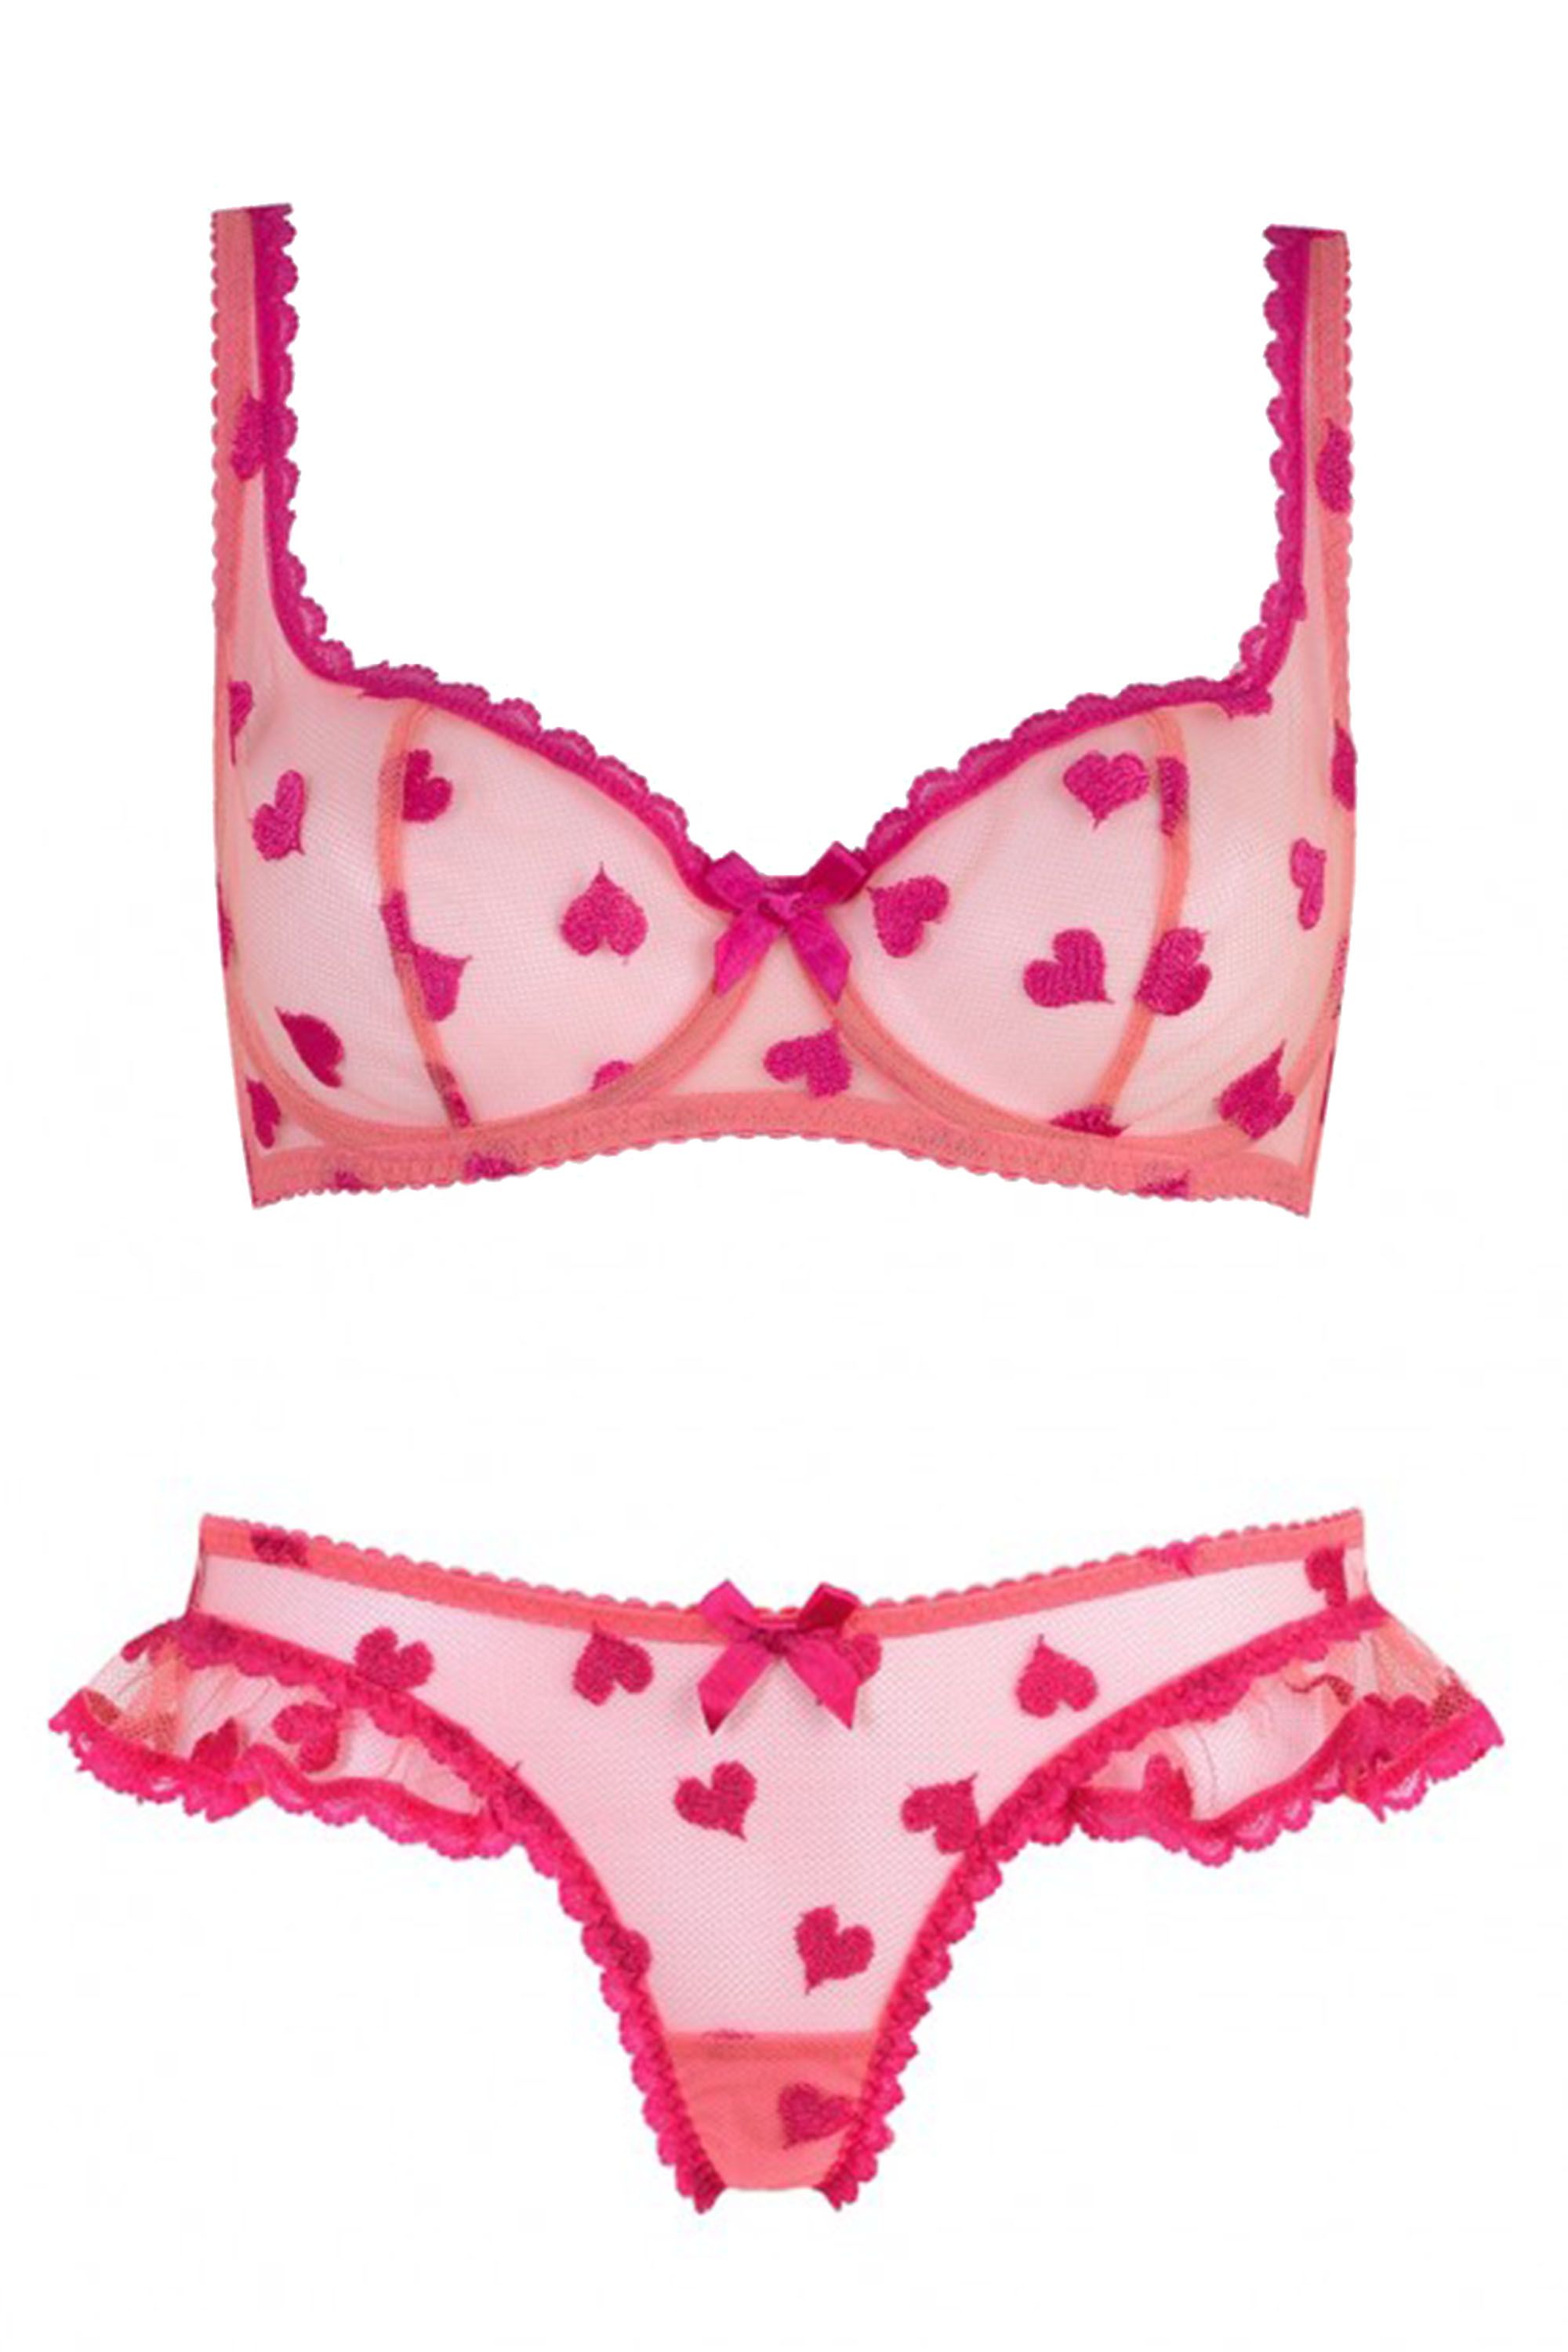 Best Lingerie Sets This Valentine's Day